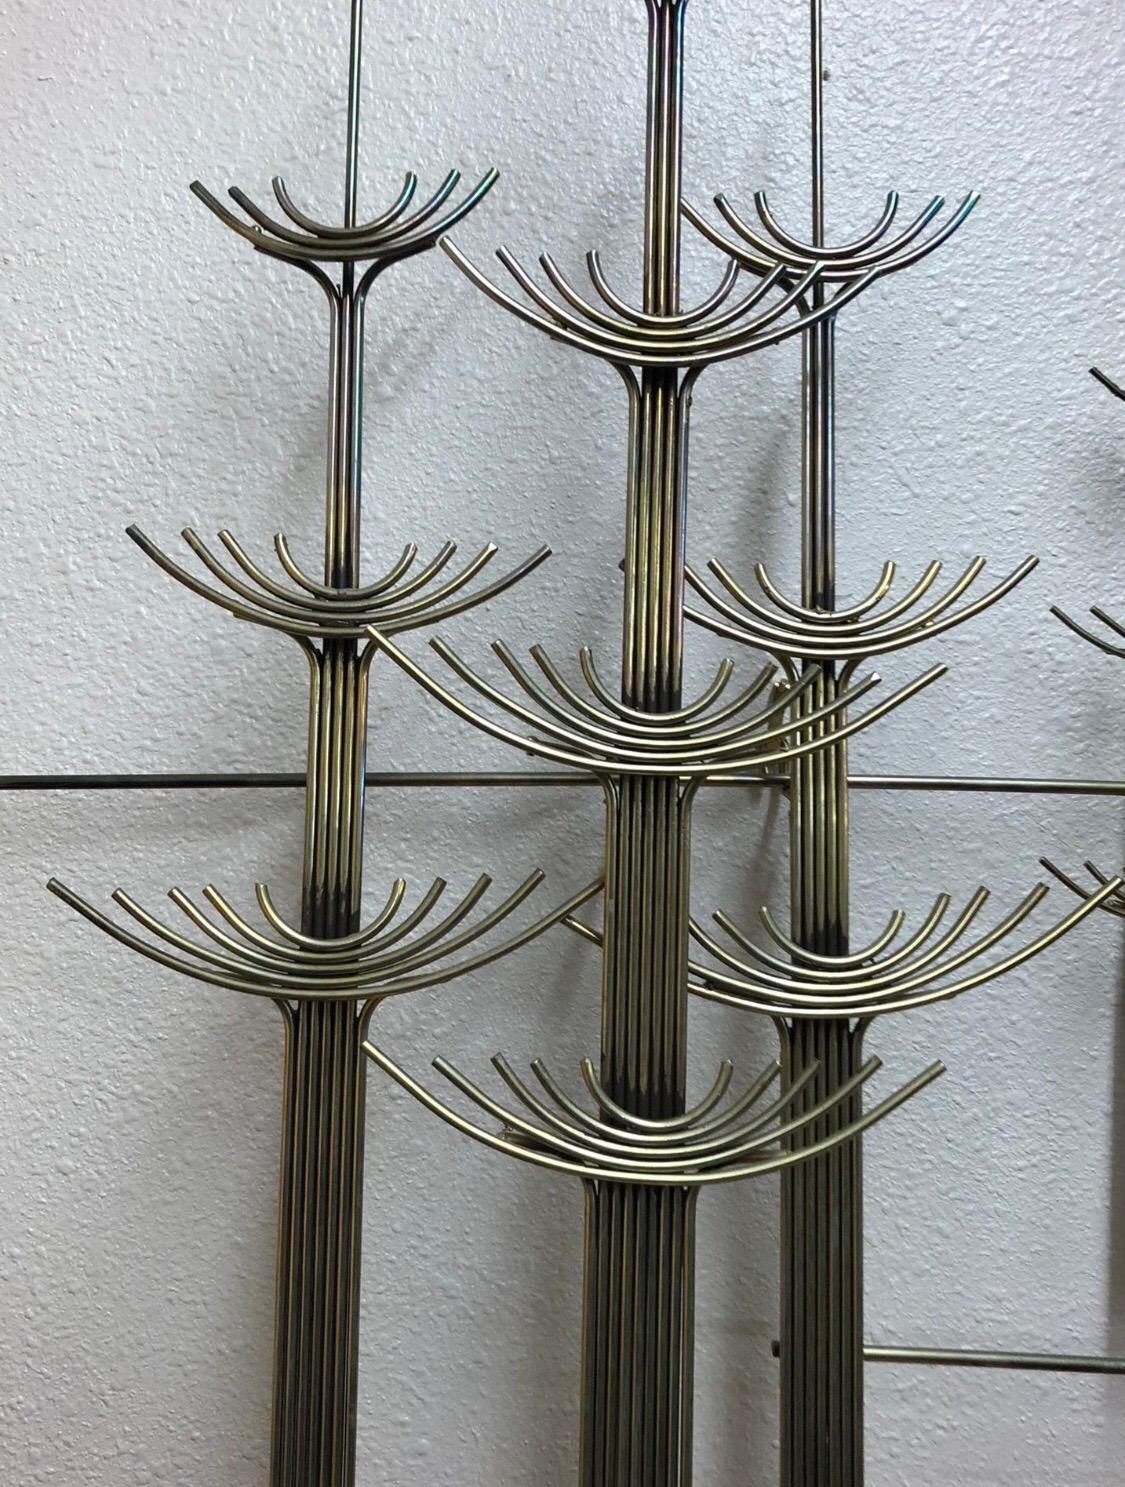 Late 20th Century Mid-Century Wall Hanging Art Sculpture Trees by Curtis Jere, 1977